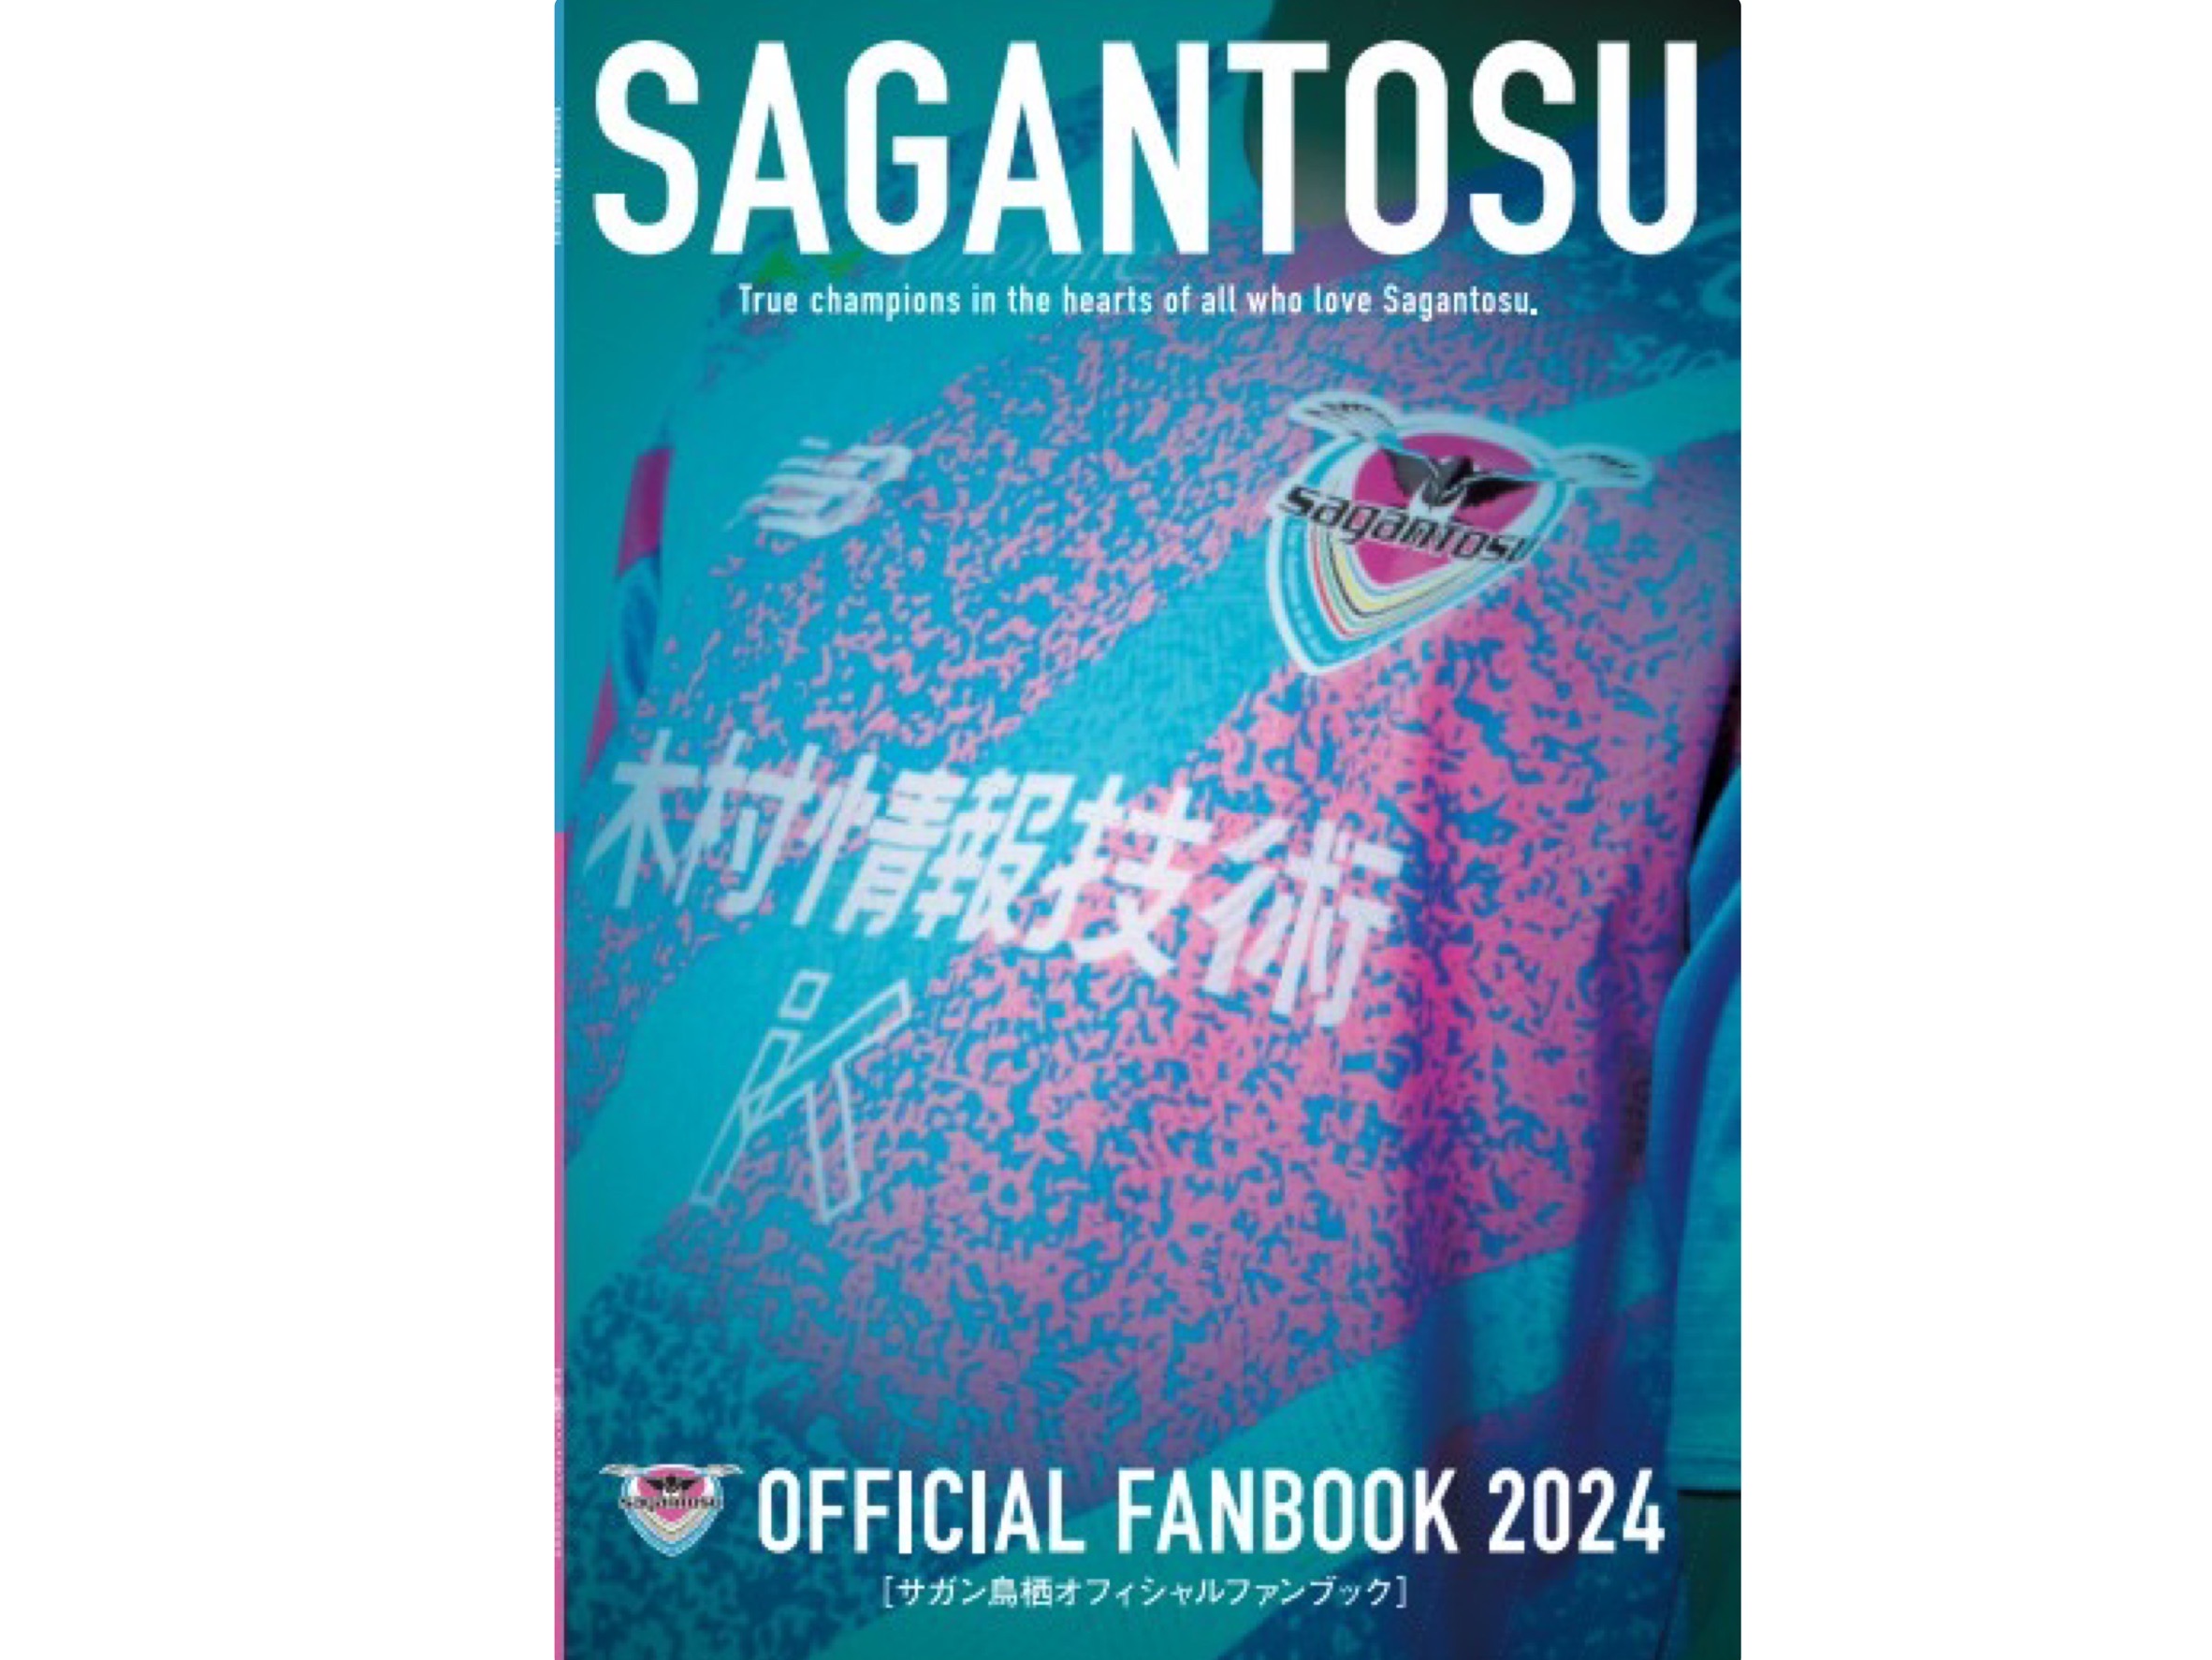 OFFICIAL FANBOOK 2024販売のお知らせ